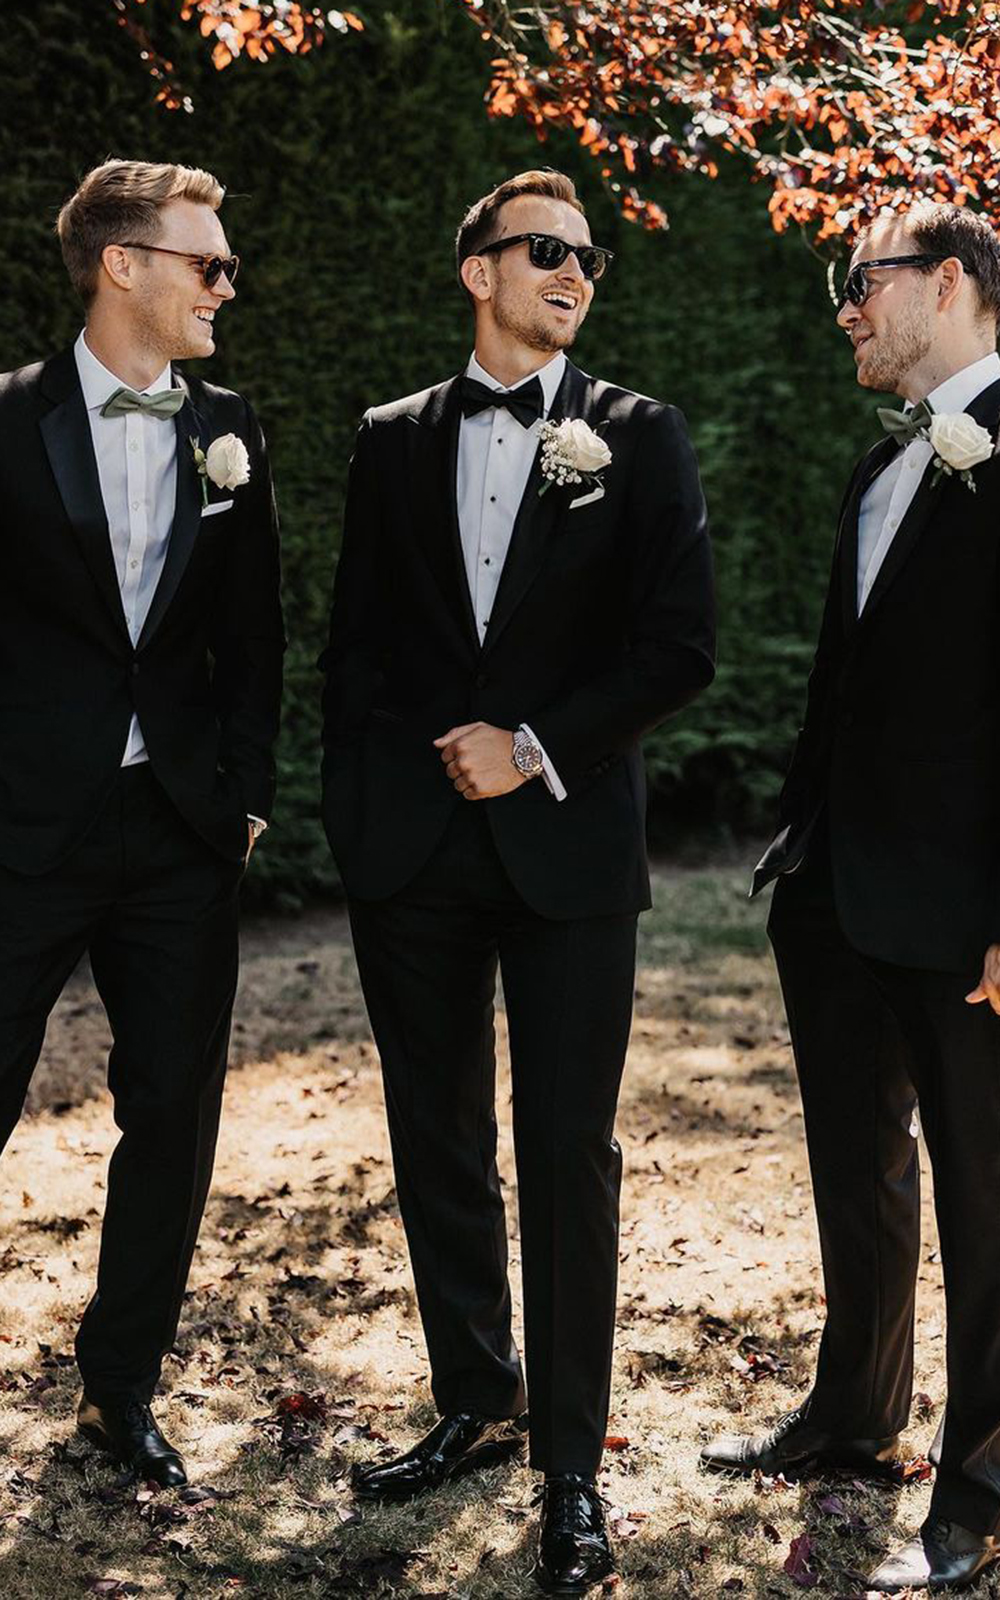 What To Wear To A Wedding | Mens Style Guide | Politix | Politix